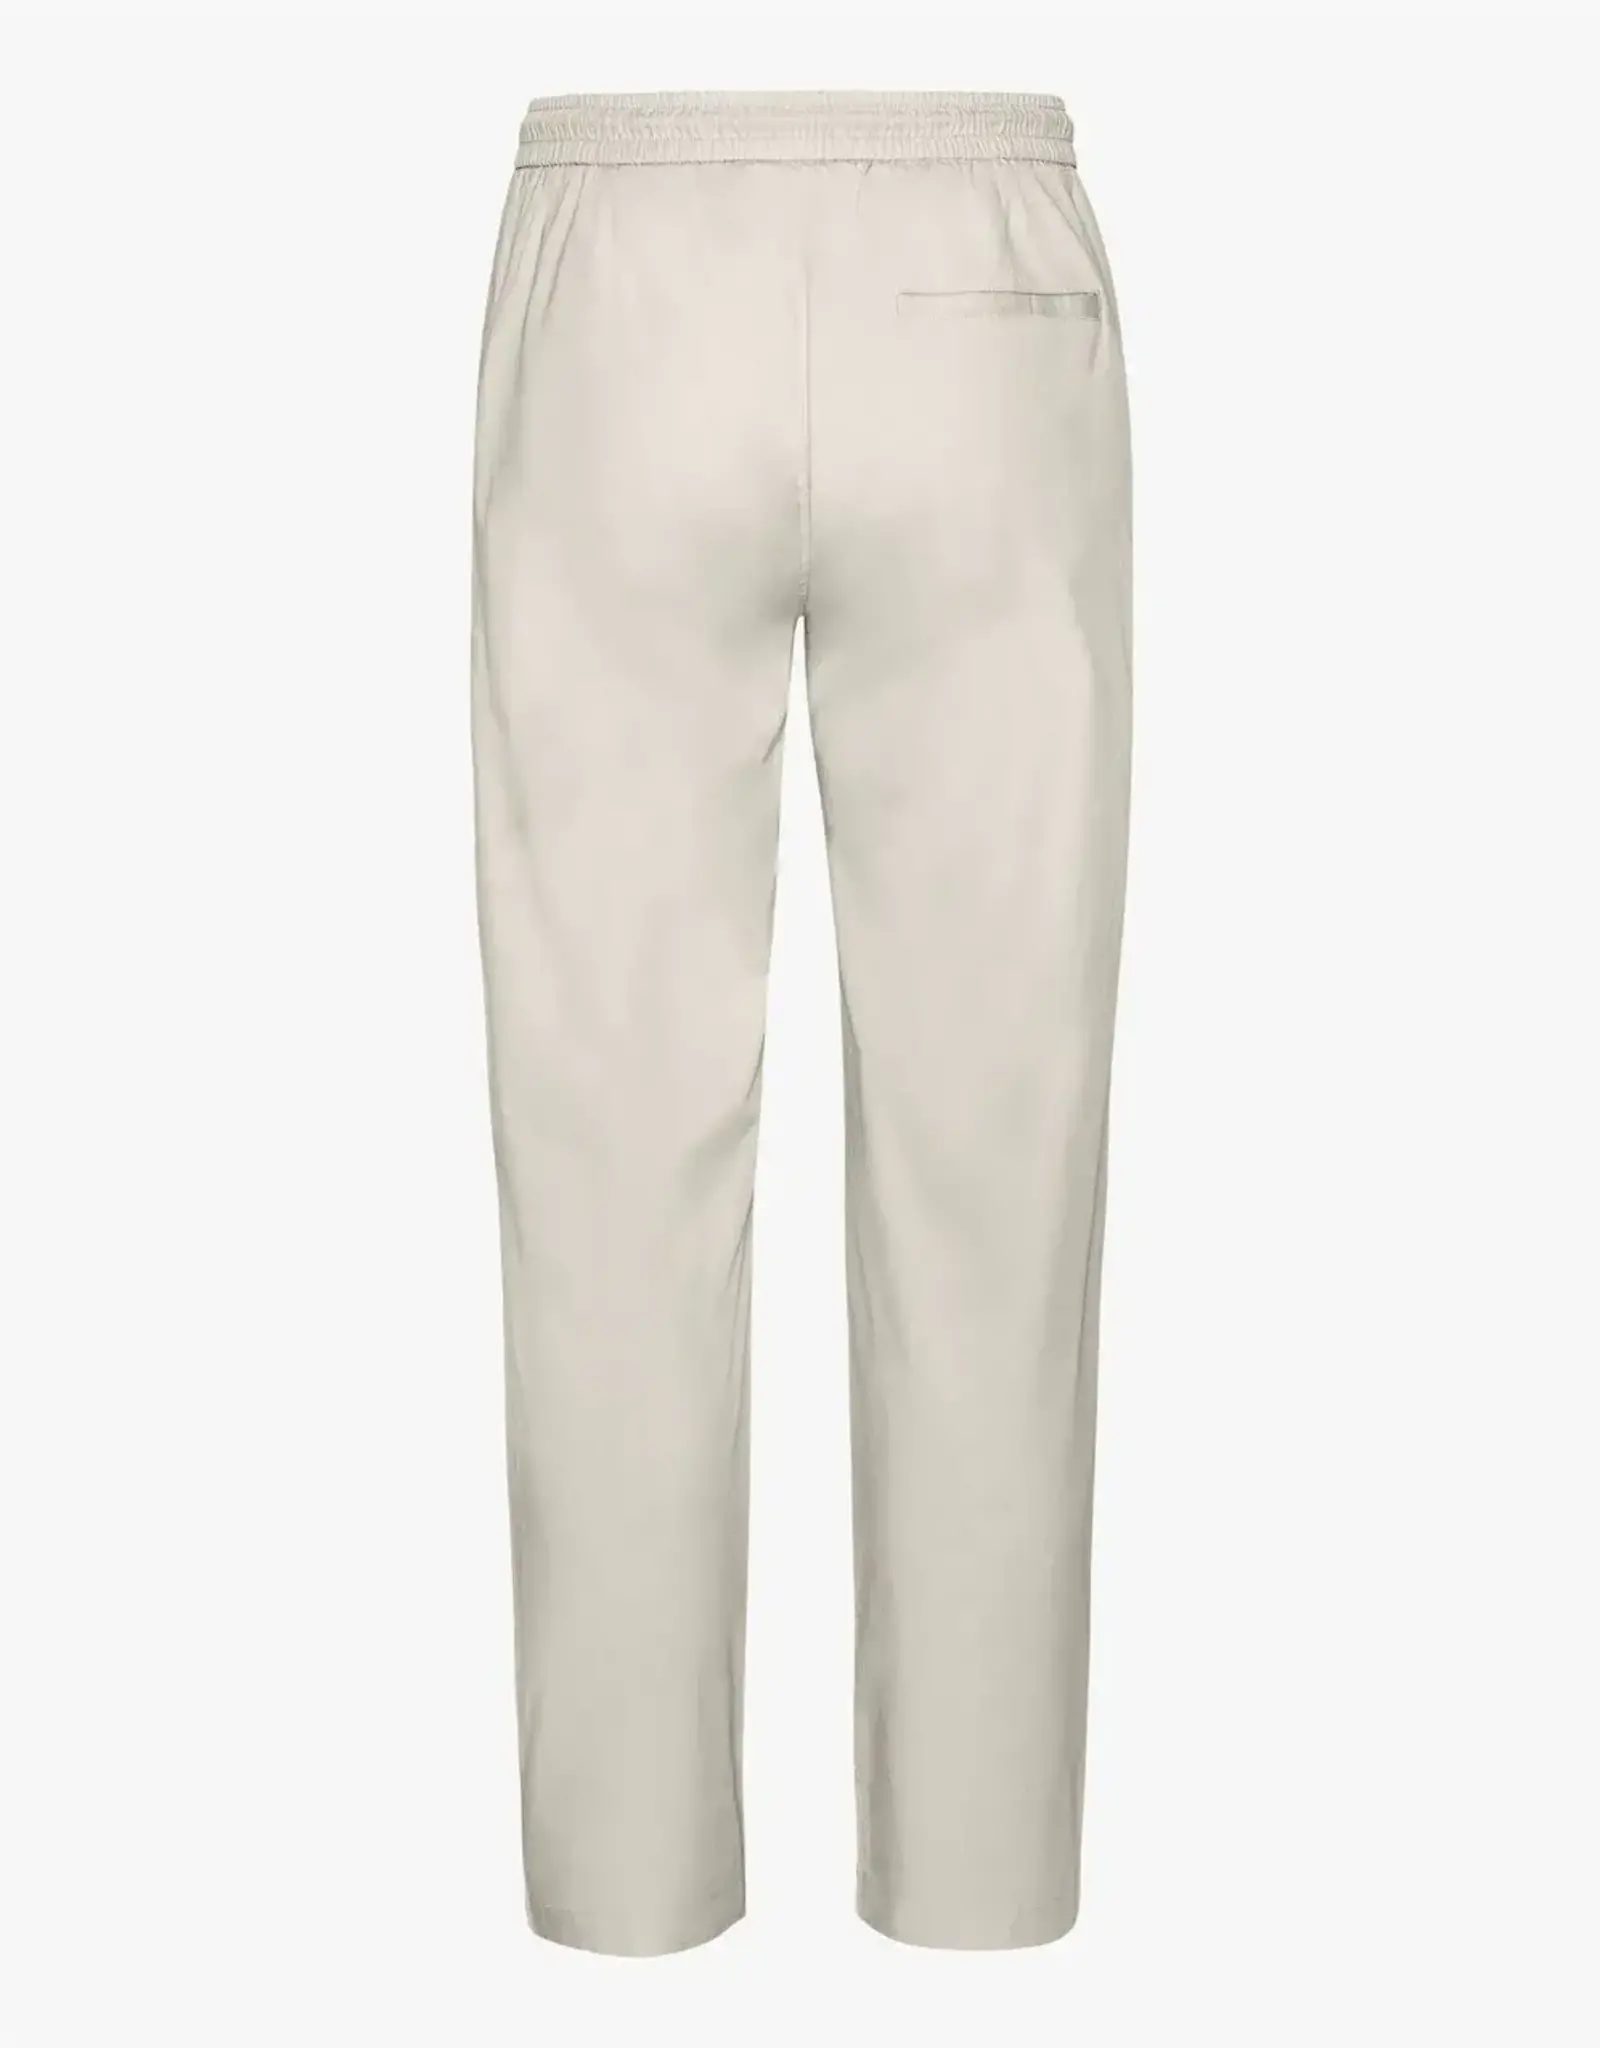 Colorful Standard Broek 'Organic Twill ' - Ivory White - Colorful Standard